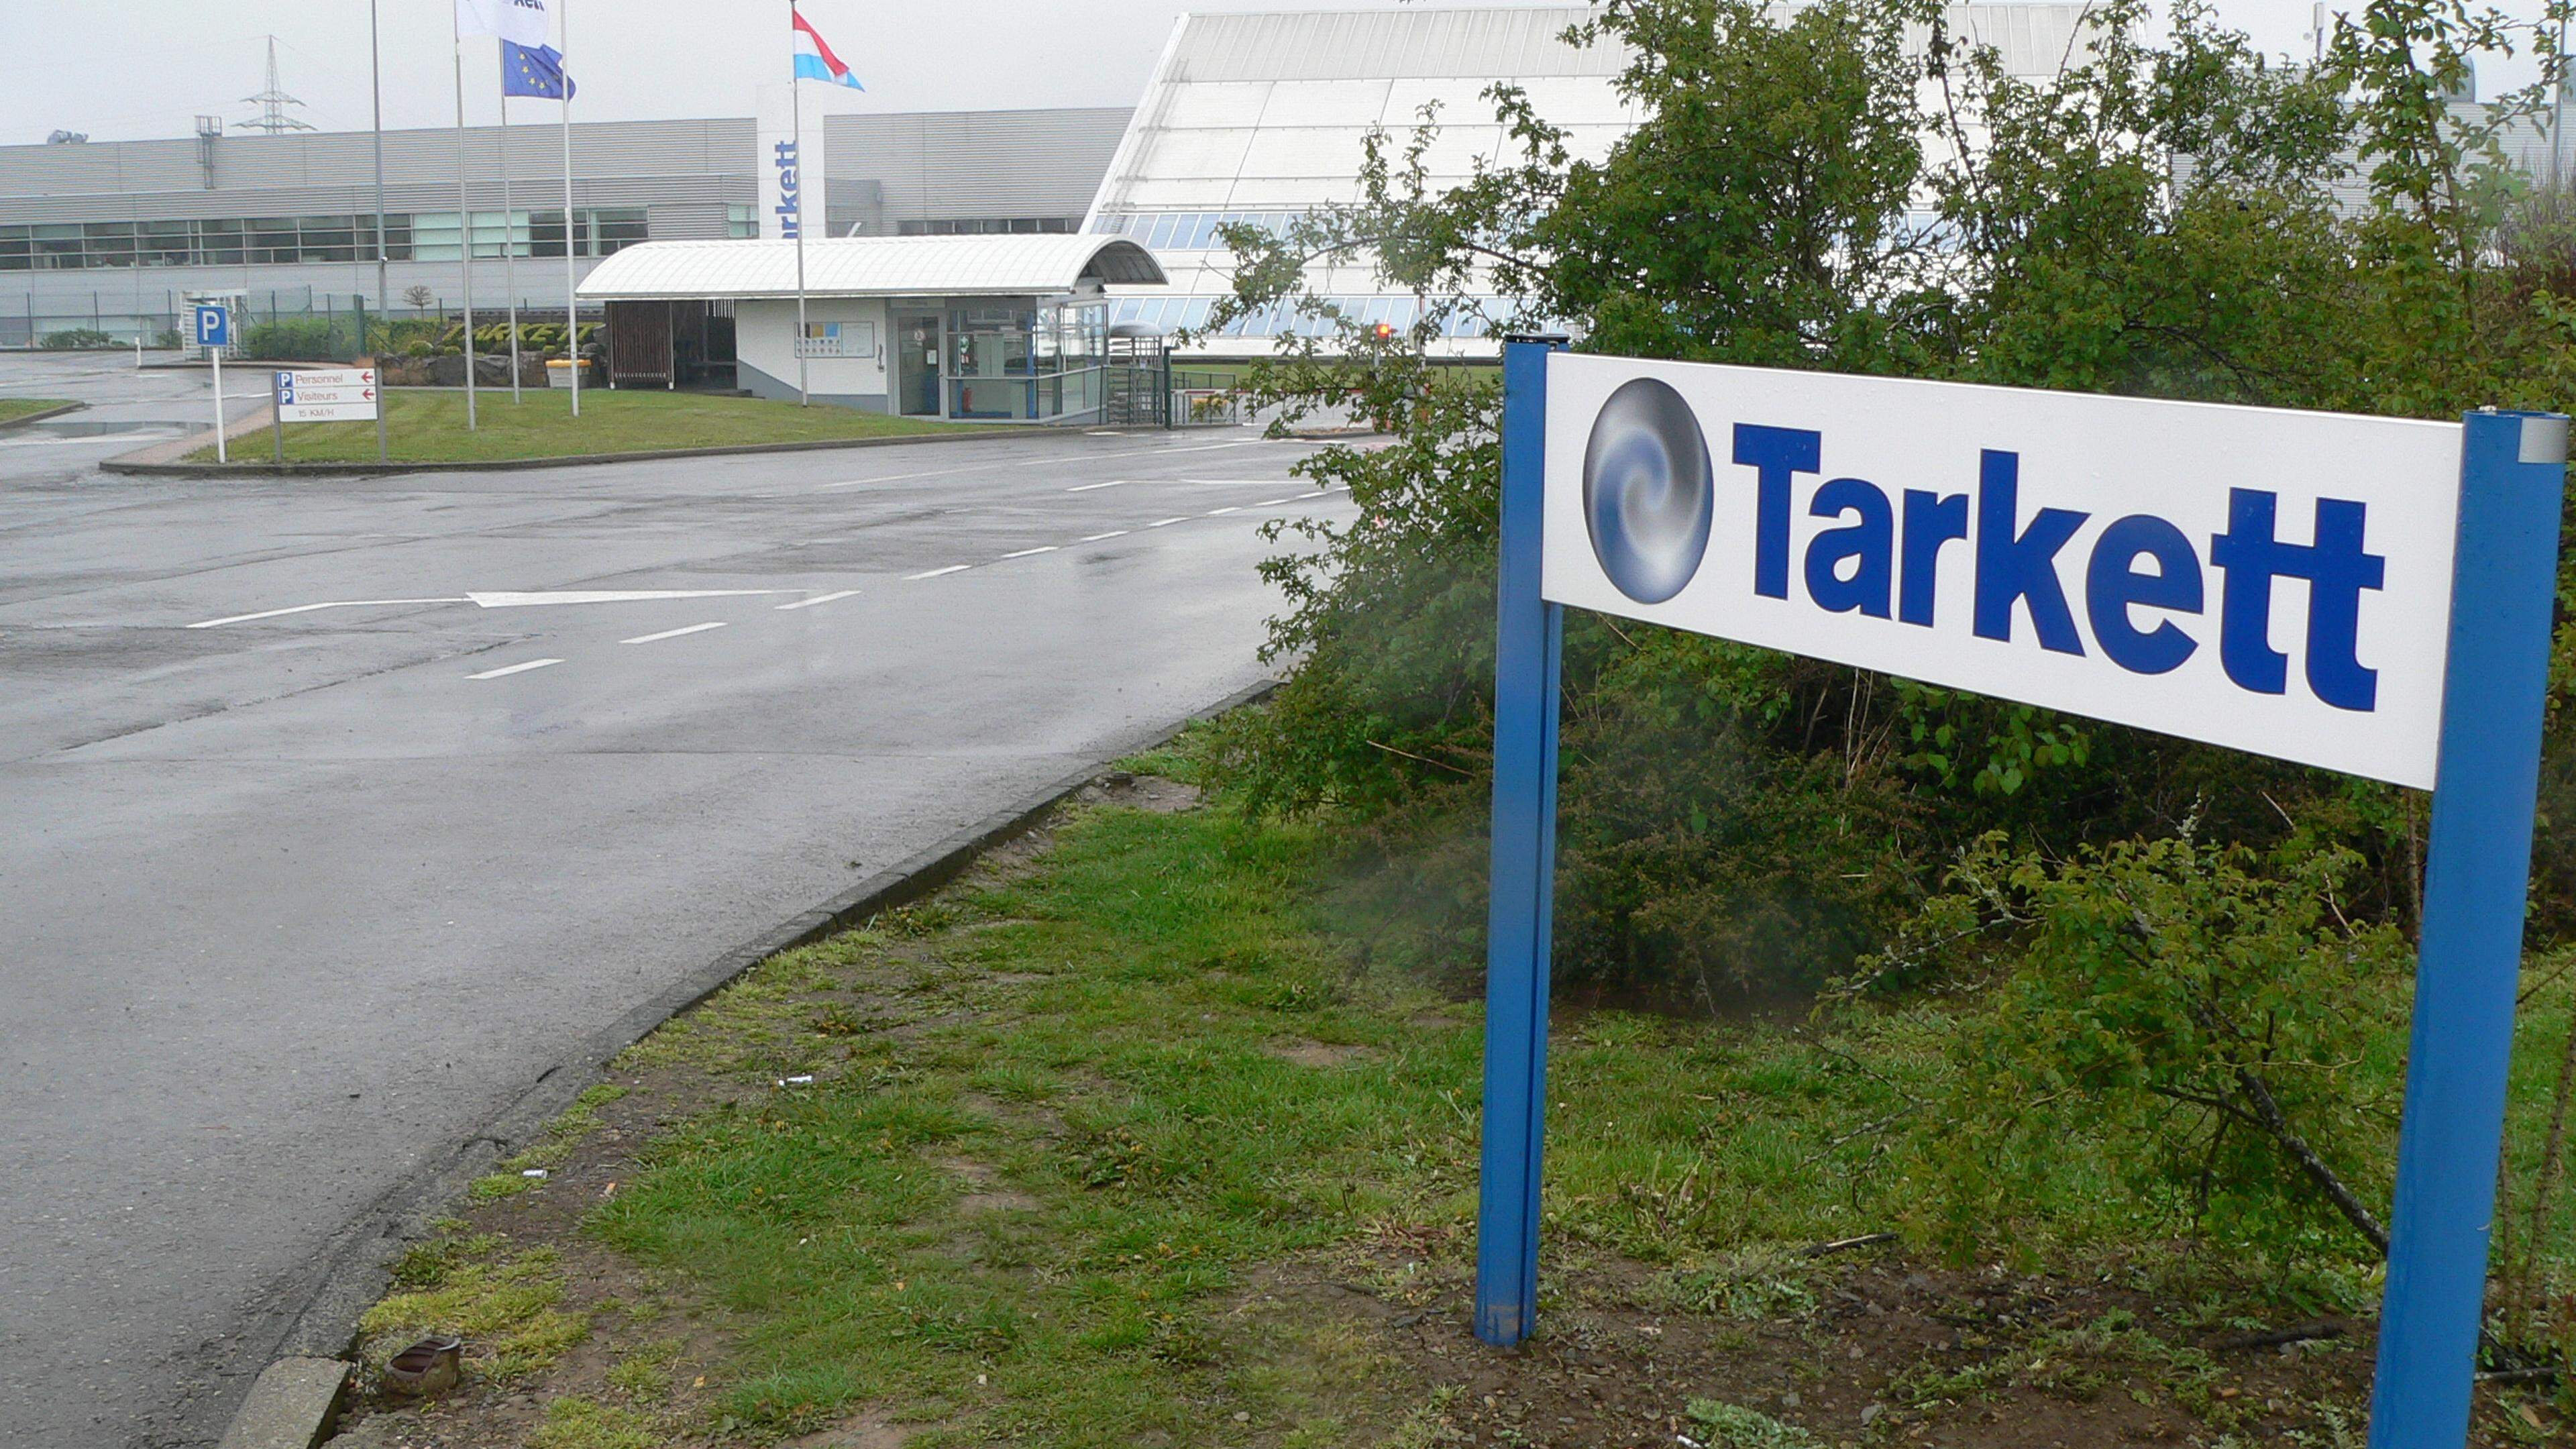 Tarkett GDL in Luxembourg consists of the production facility in Lentzweiler/Clerf and the centre for research, development and innovation in Wiltz. 